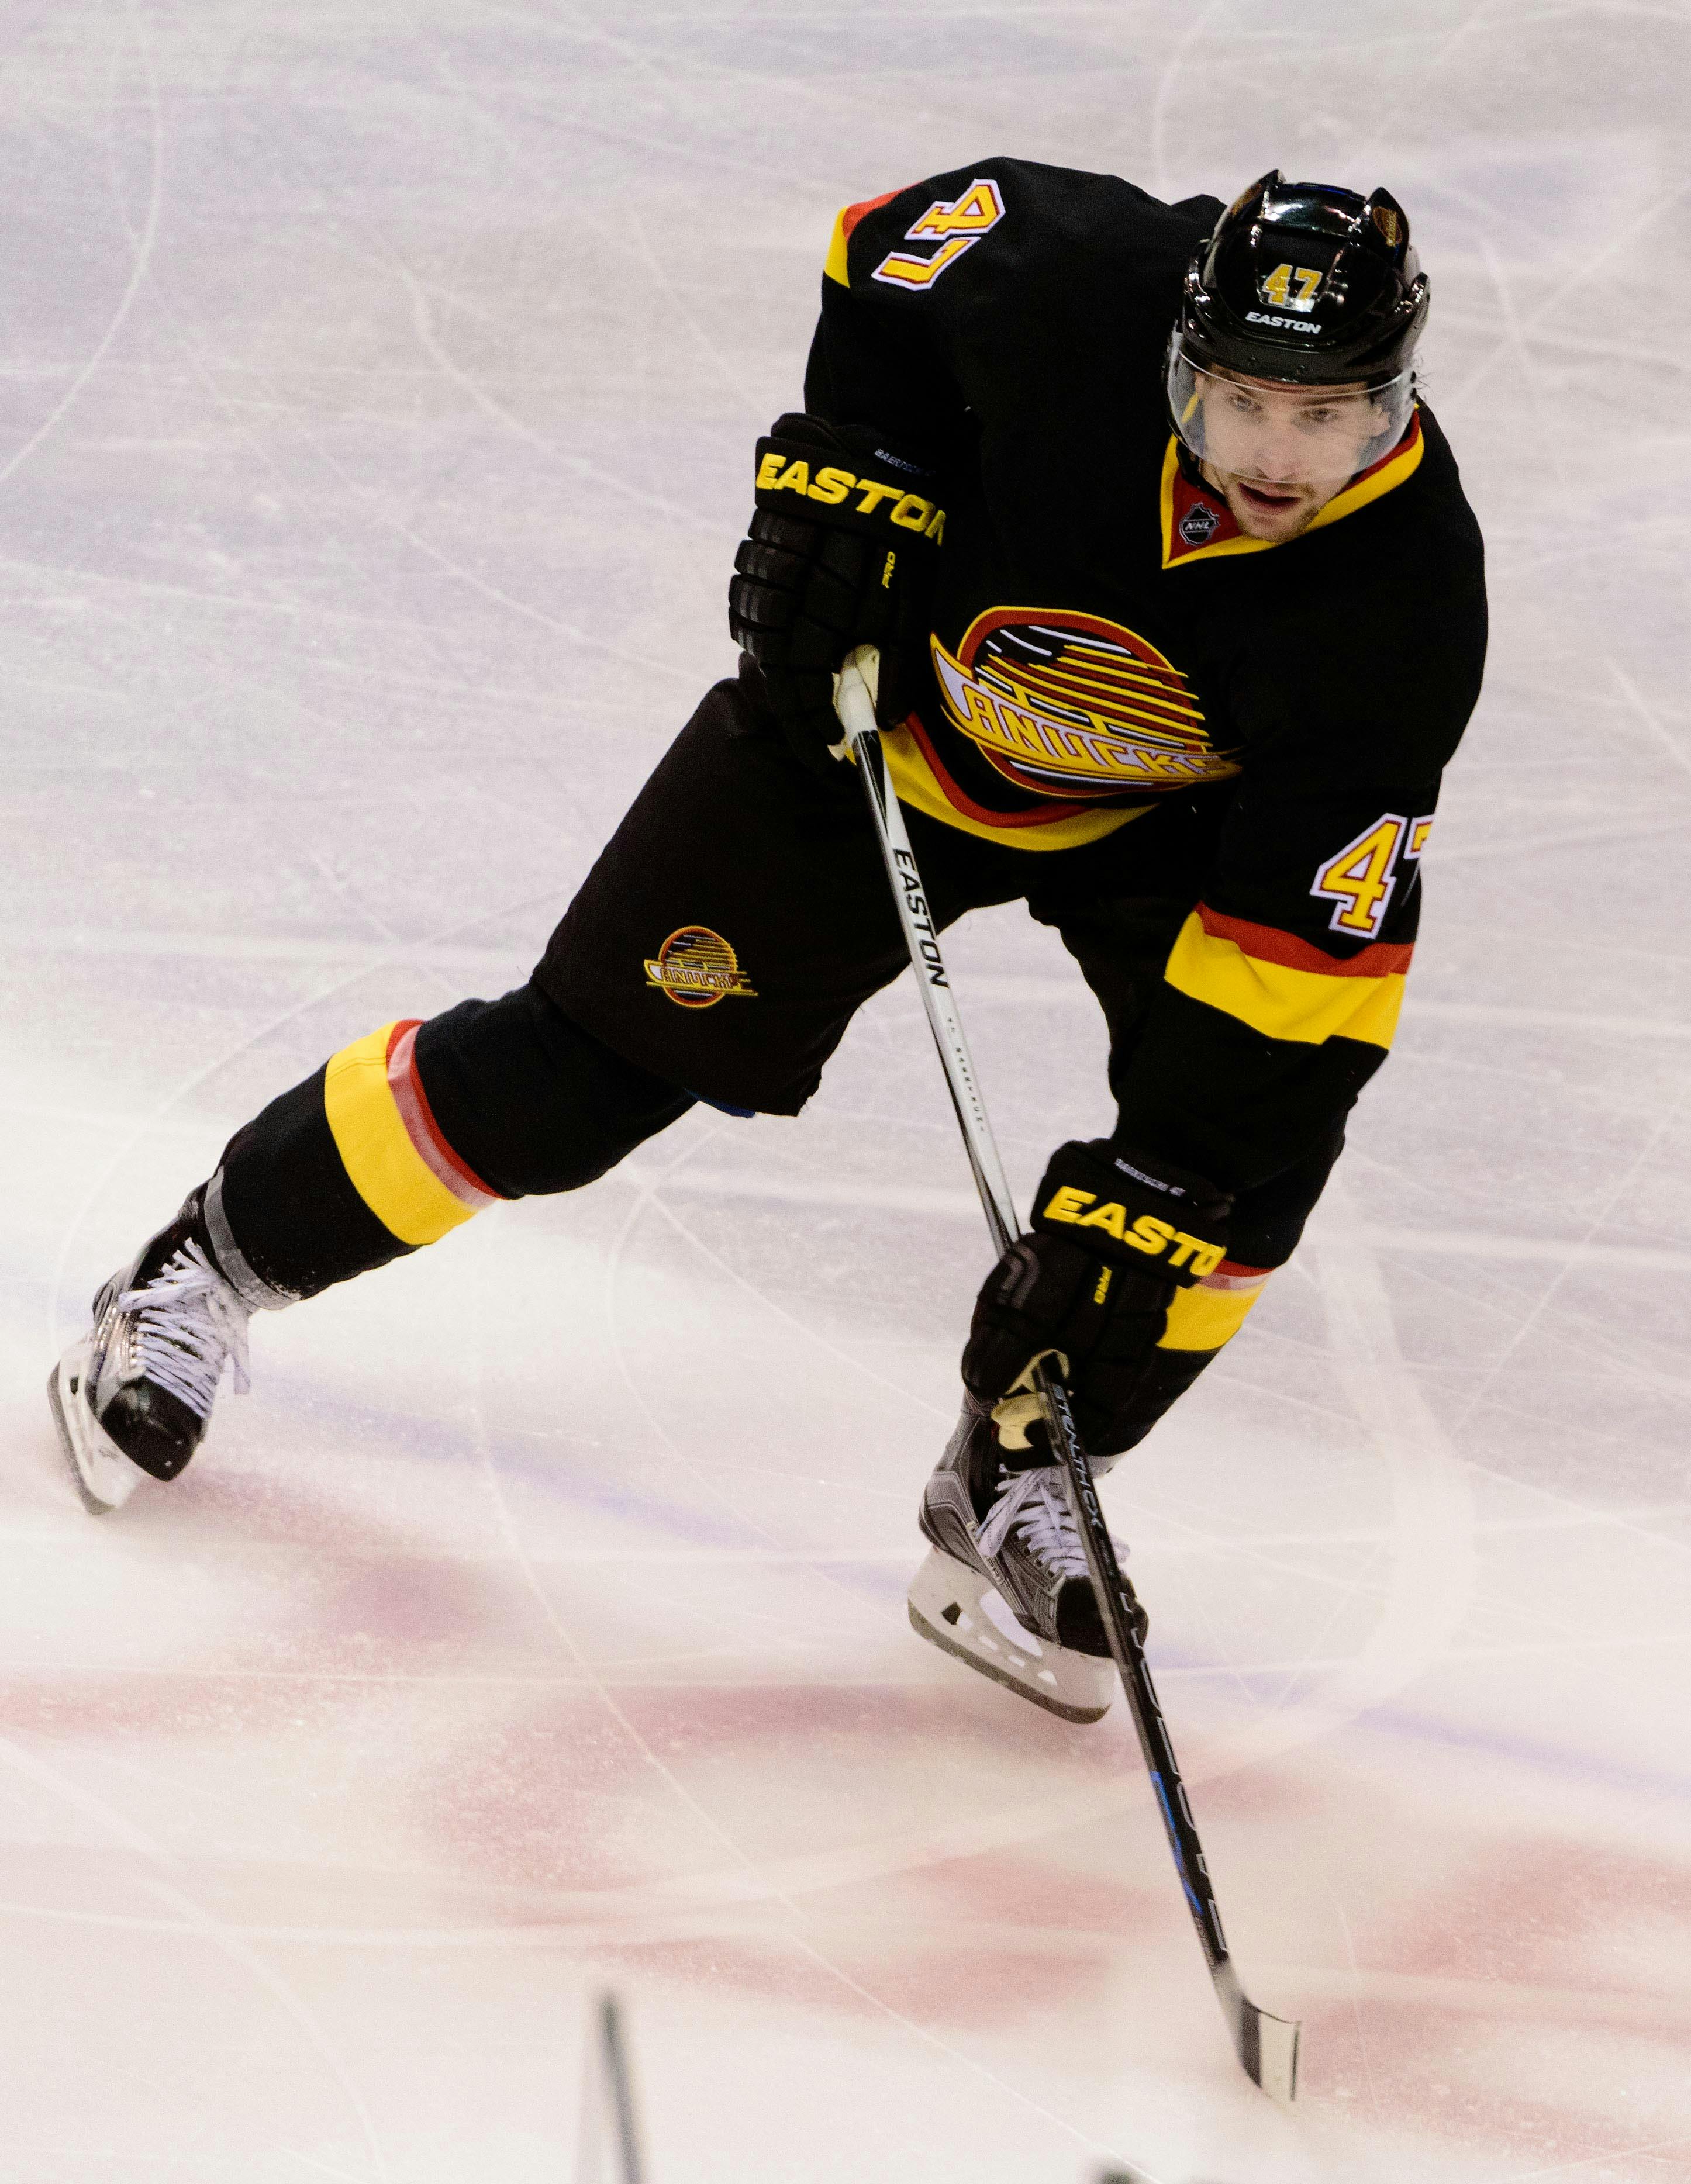 Should the Canucks bring back the skate jersey full time?